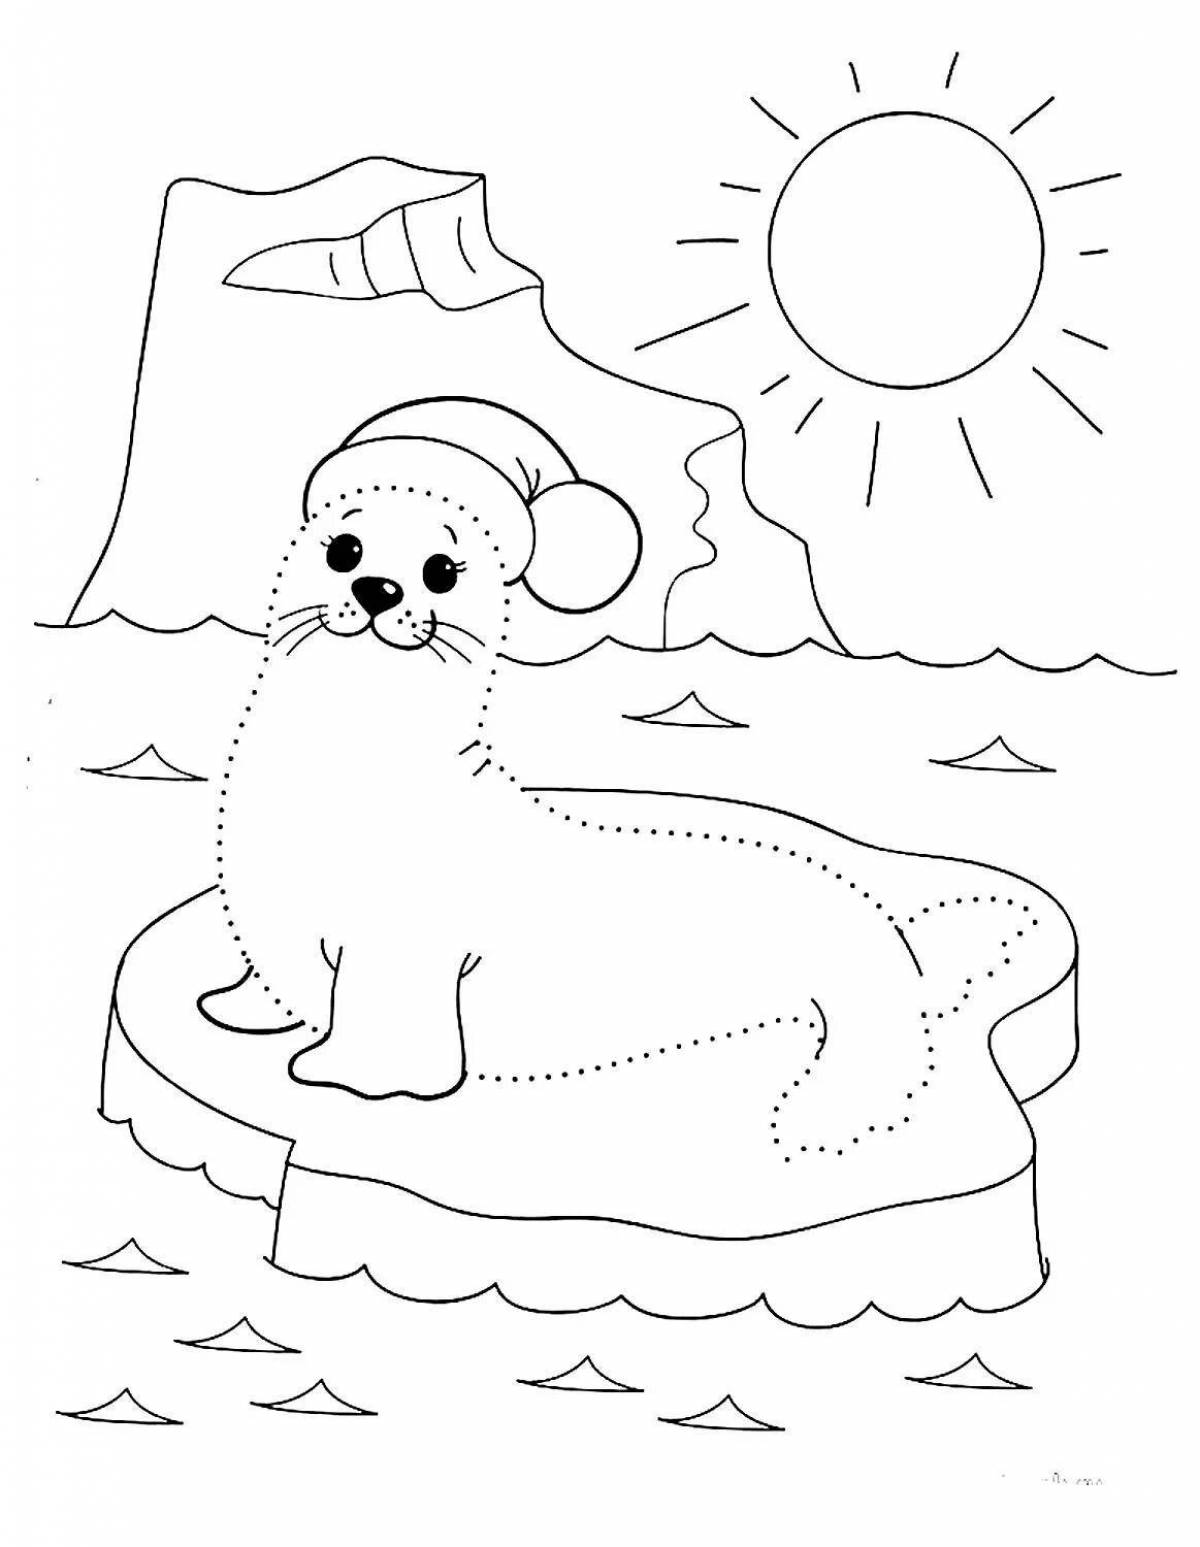 Coloring book calm seal on ice